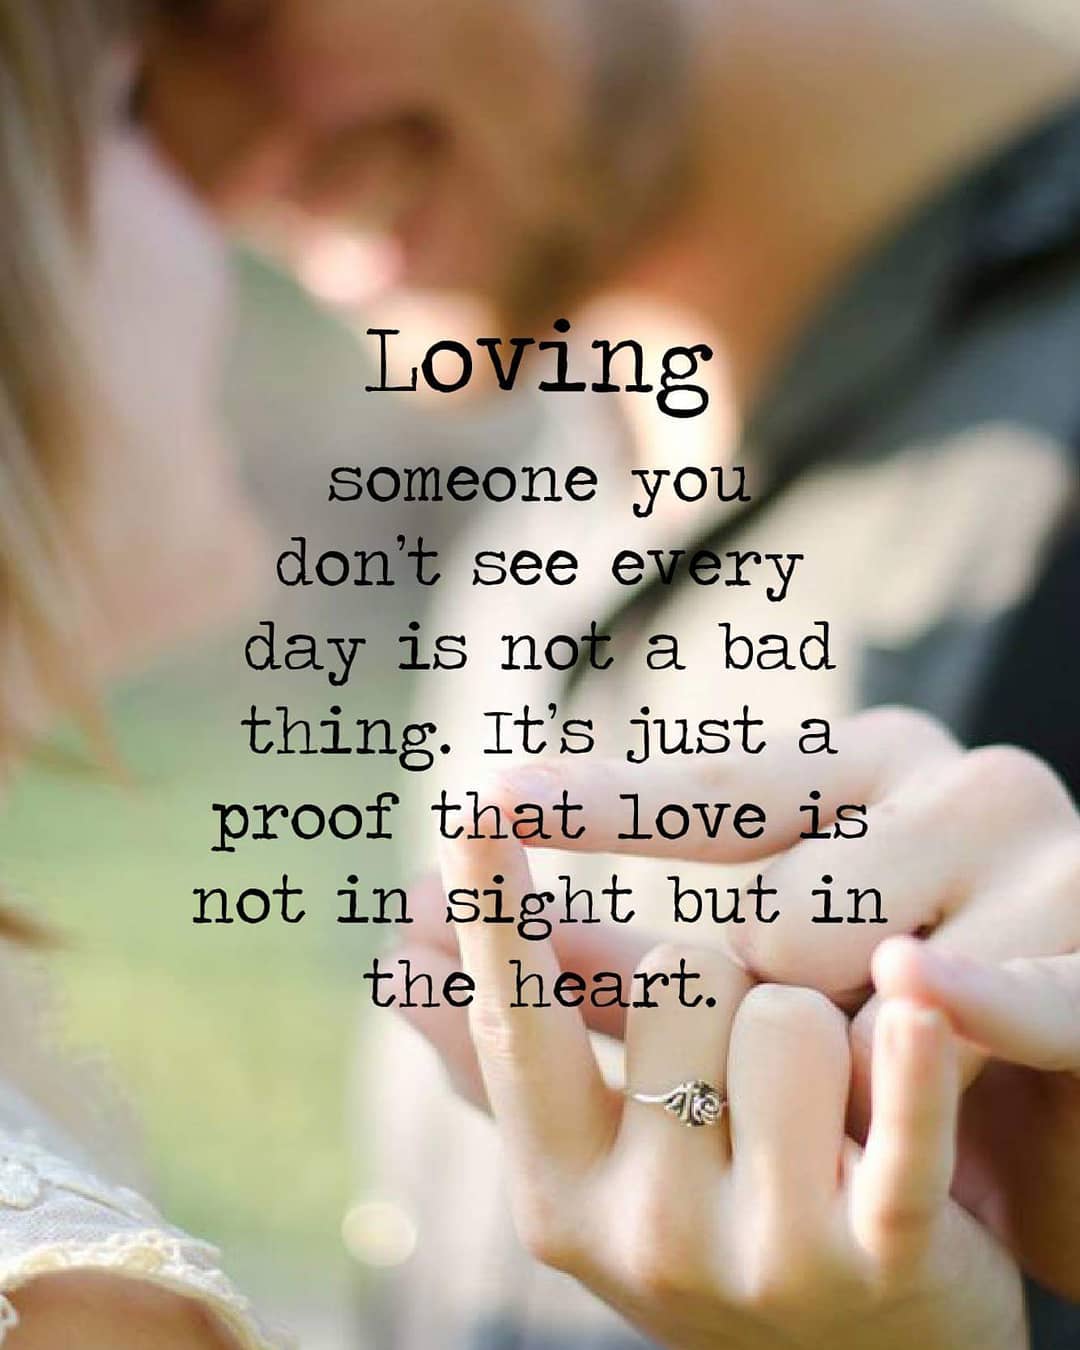 Top 10 Love Quotes Images Download Free #Quotes#love quotes#indie#